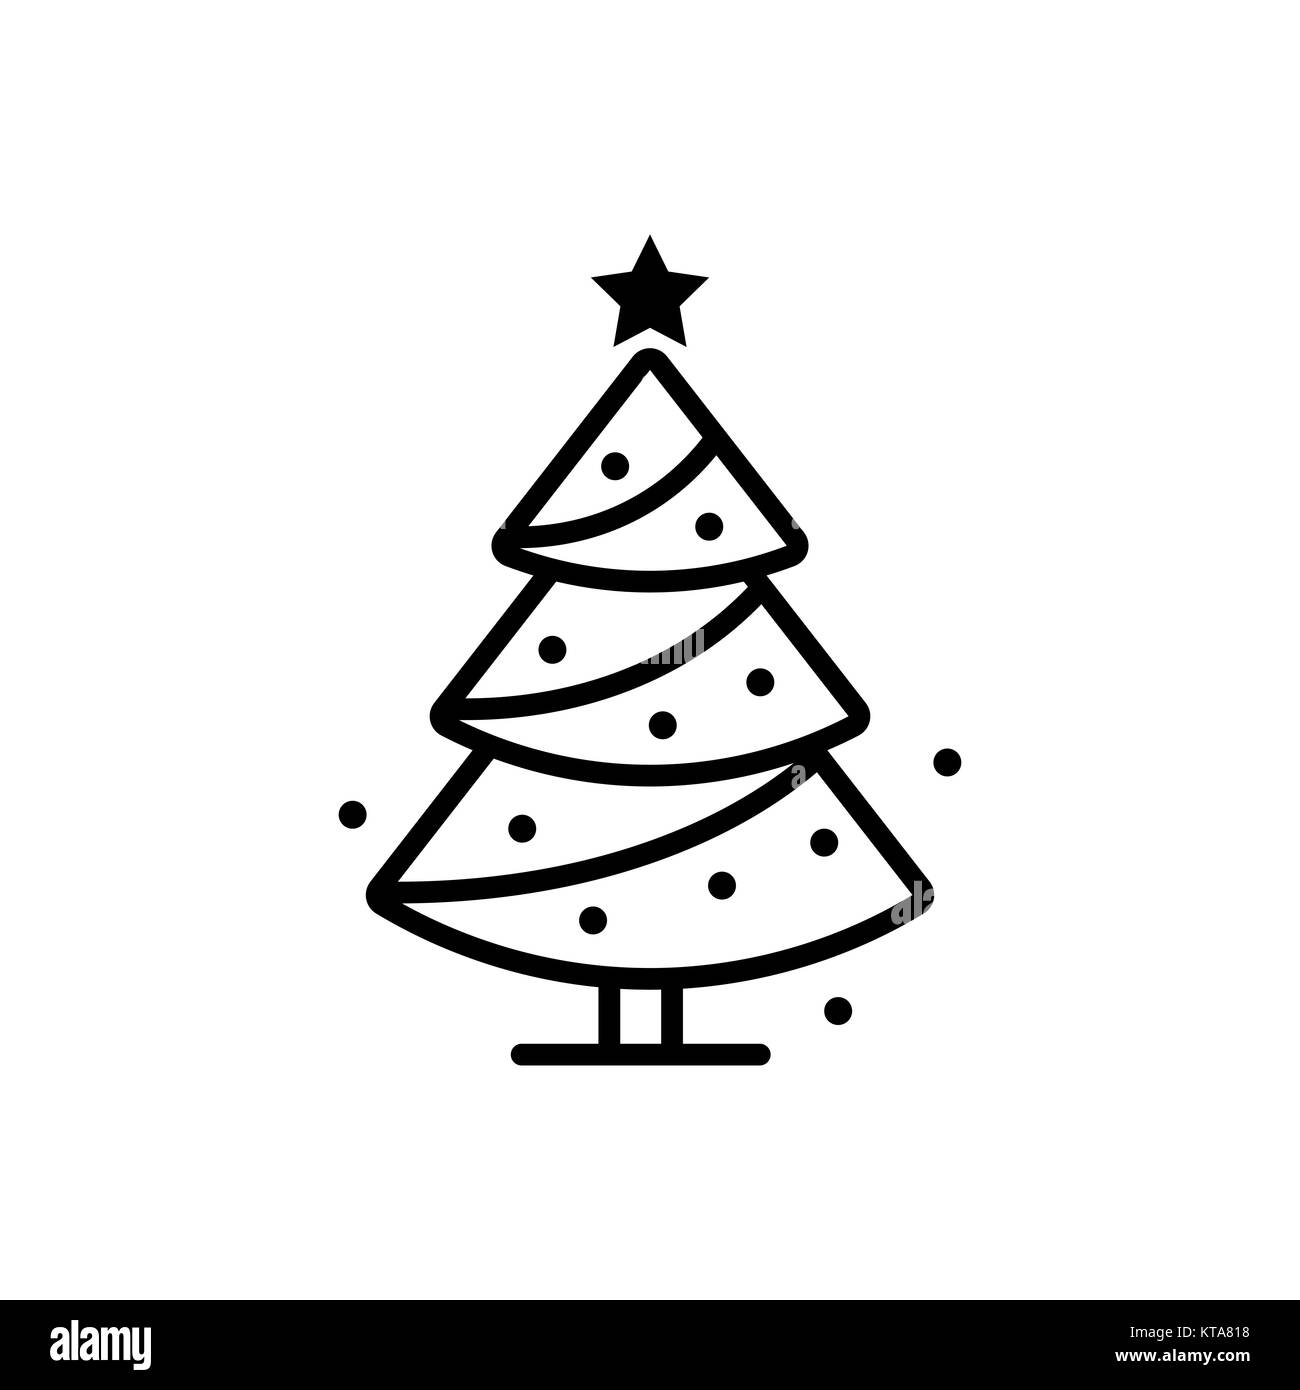 Christmas tree line icon, vector sign Stock Vector